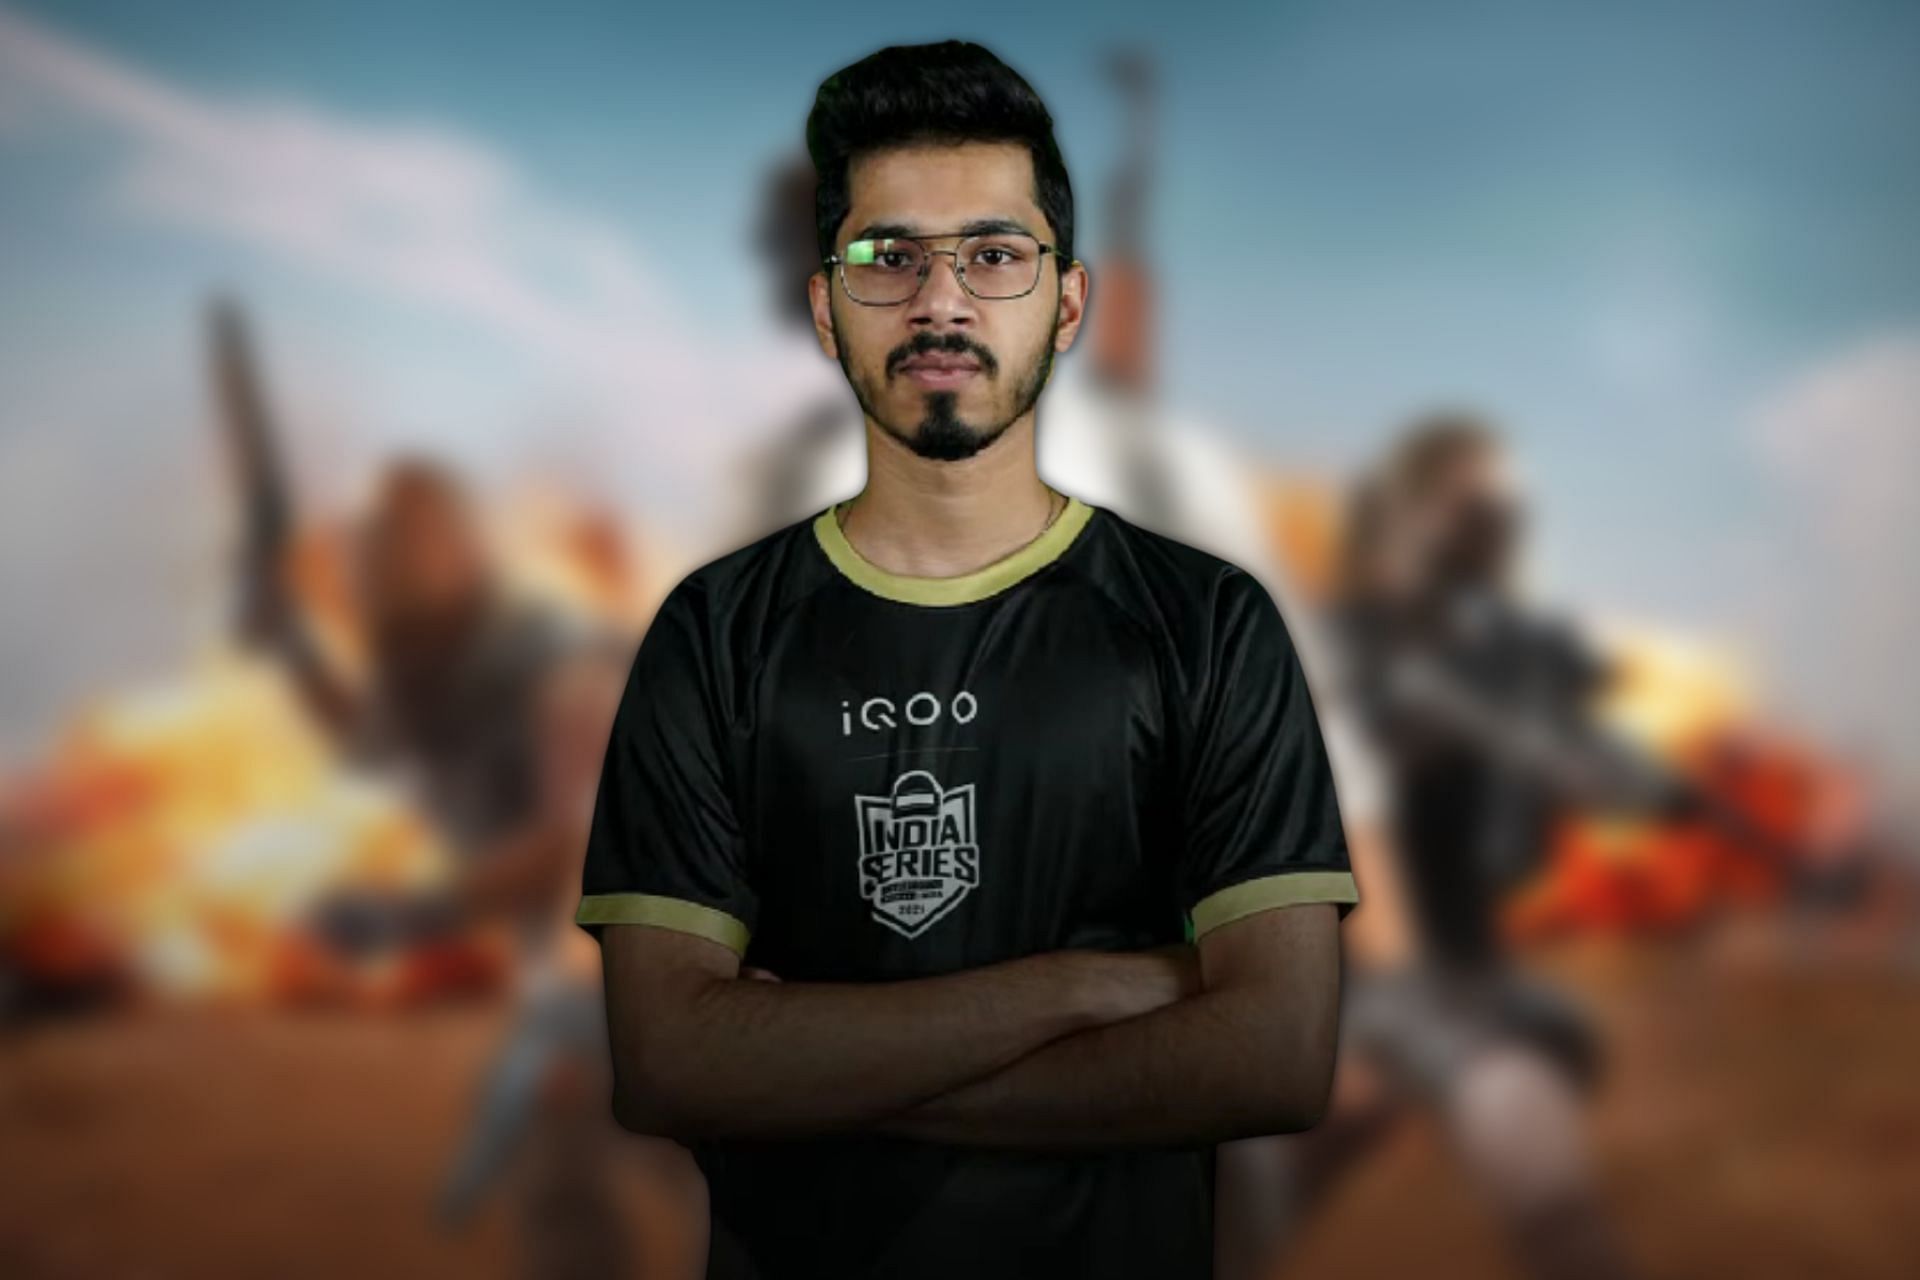 Saumraj hass lead team Skylightz Gaming to the top of the table in the LAN event (Image via Sportskeeda)